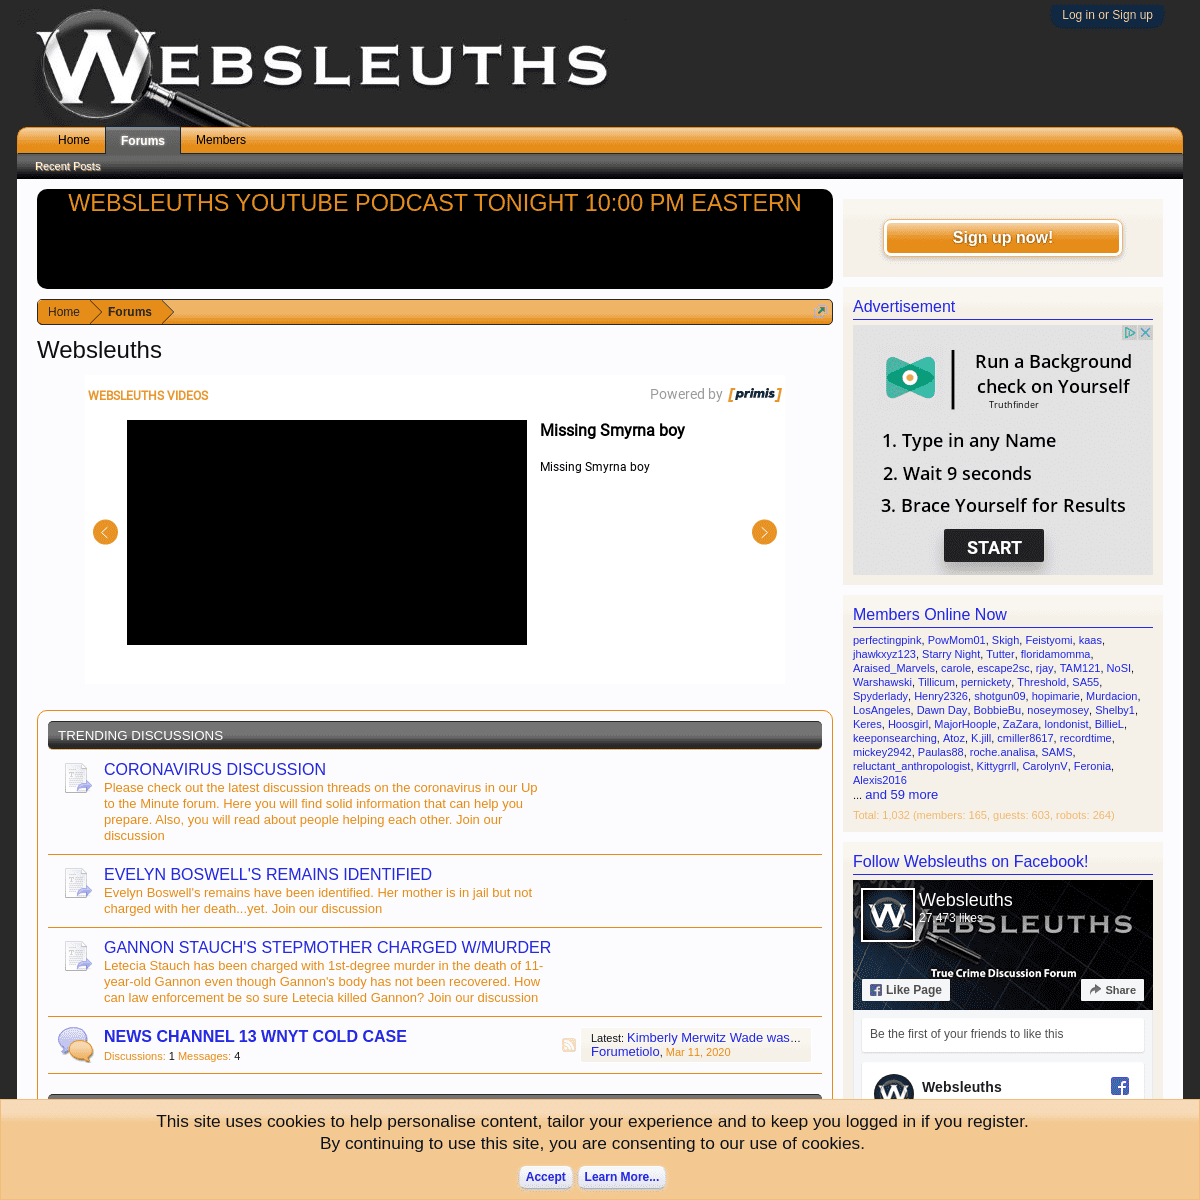 A complete backup of websleuths.com